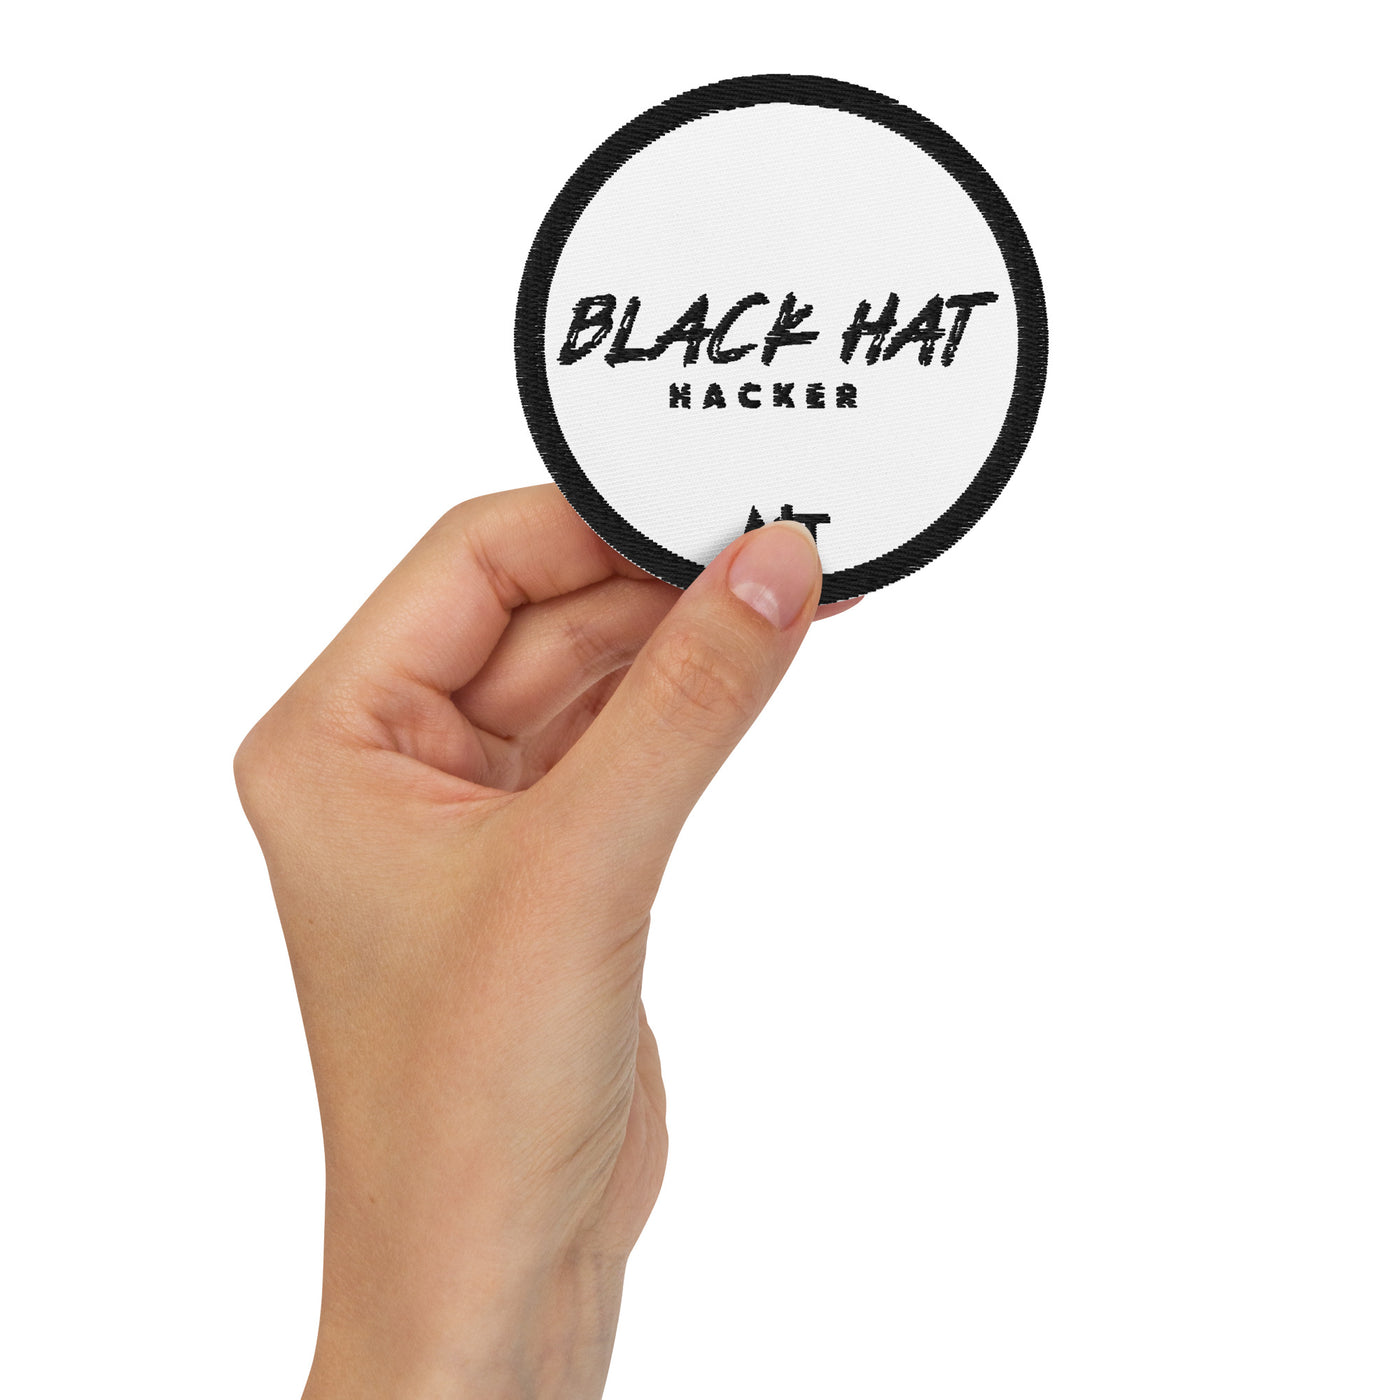 Black Hat Hacker V19 - Embroidered patches